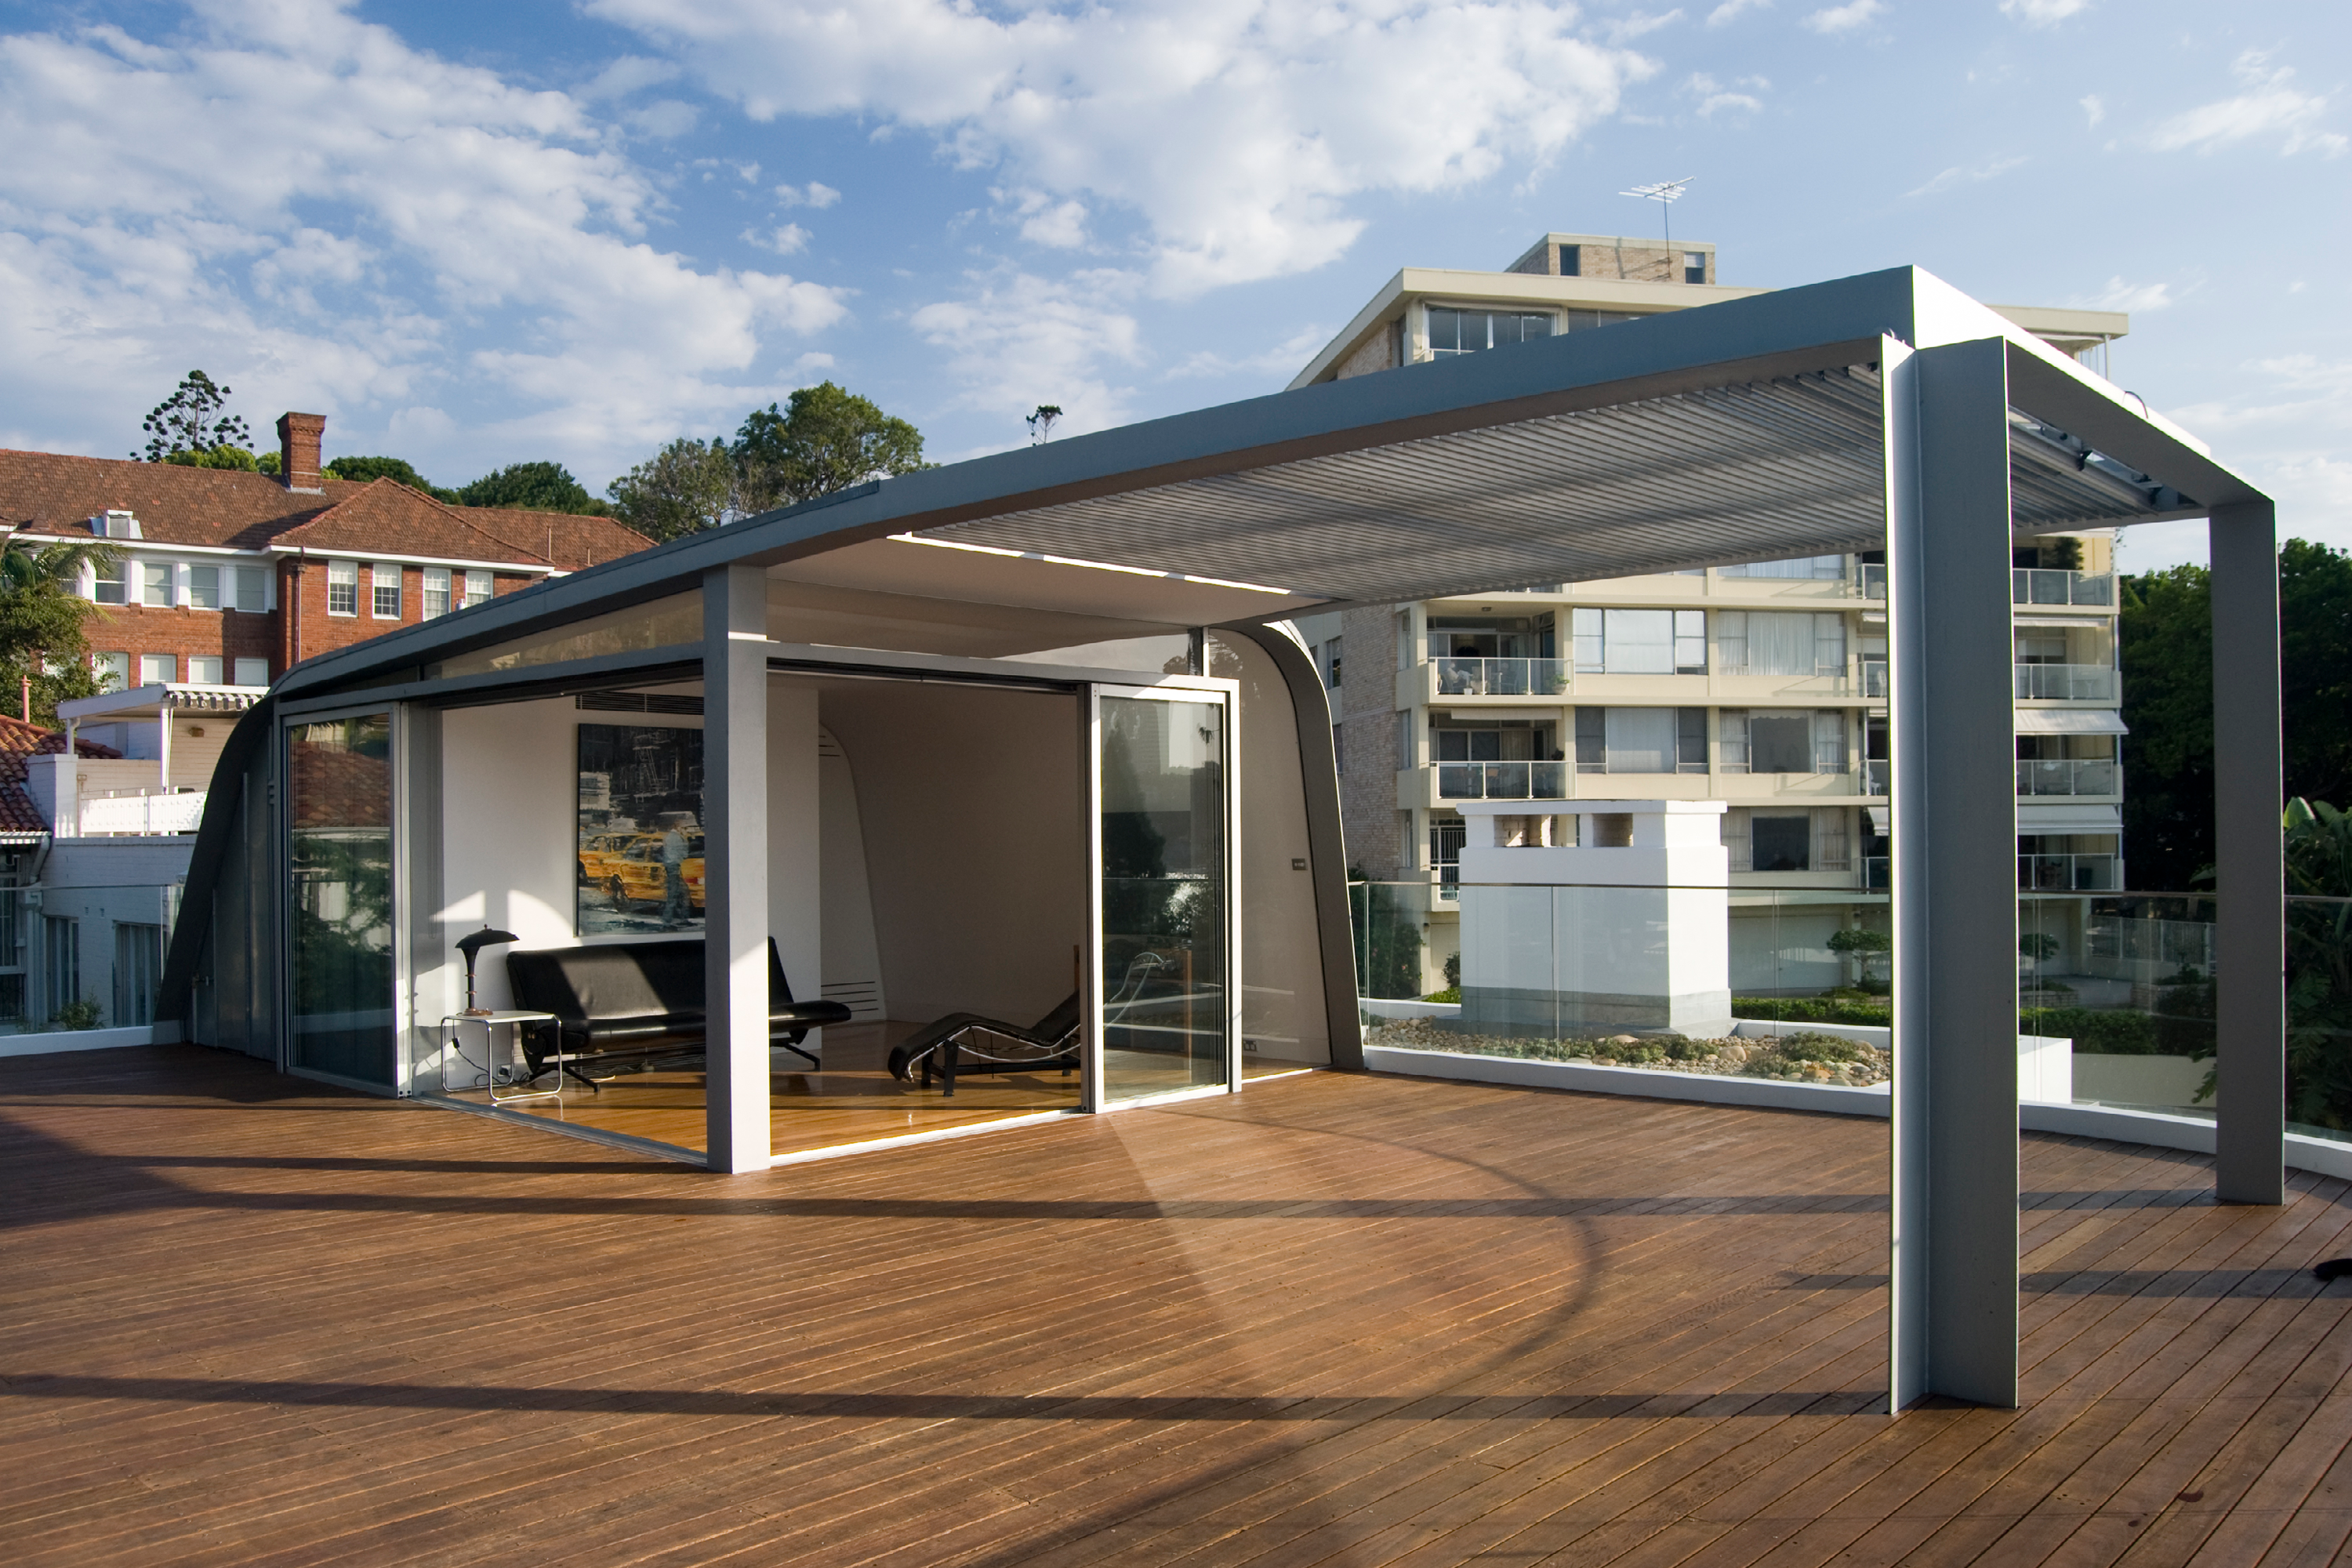 Photograph of the award-wining Roof Pavilion Point Piper designed by Tzannes